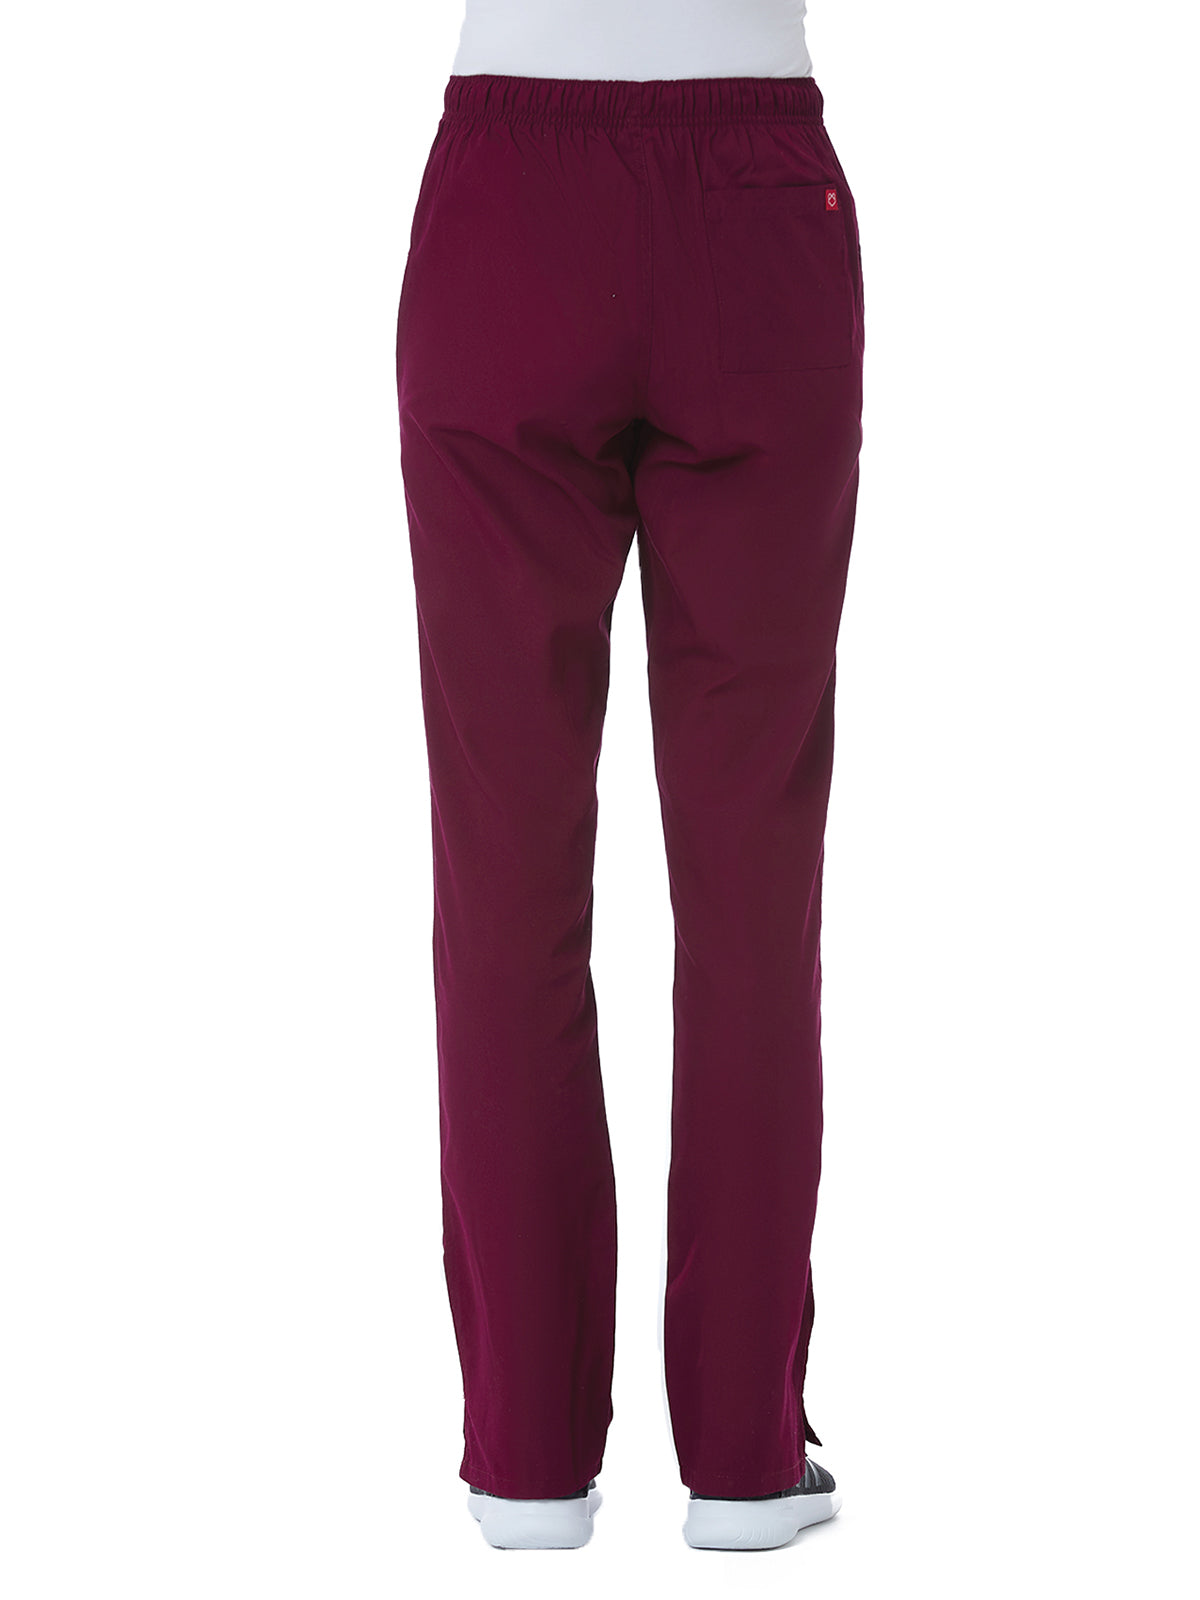 Women's Exceptionally Soft Pant - 9716 - Wine